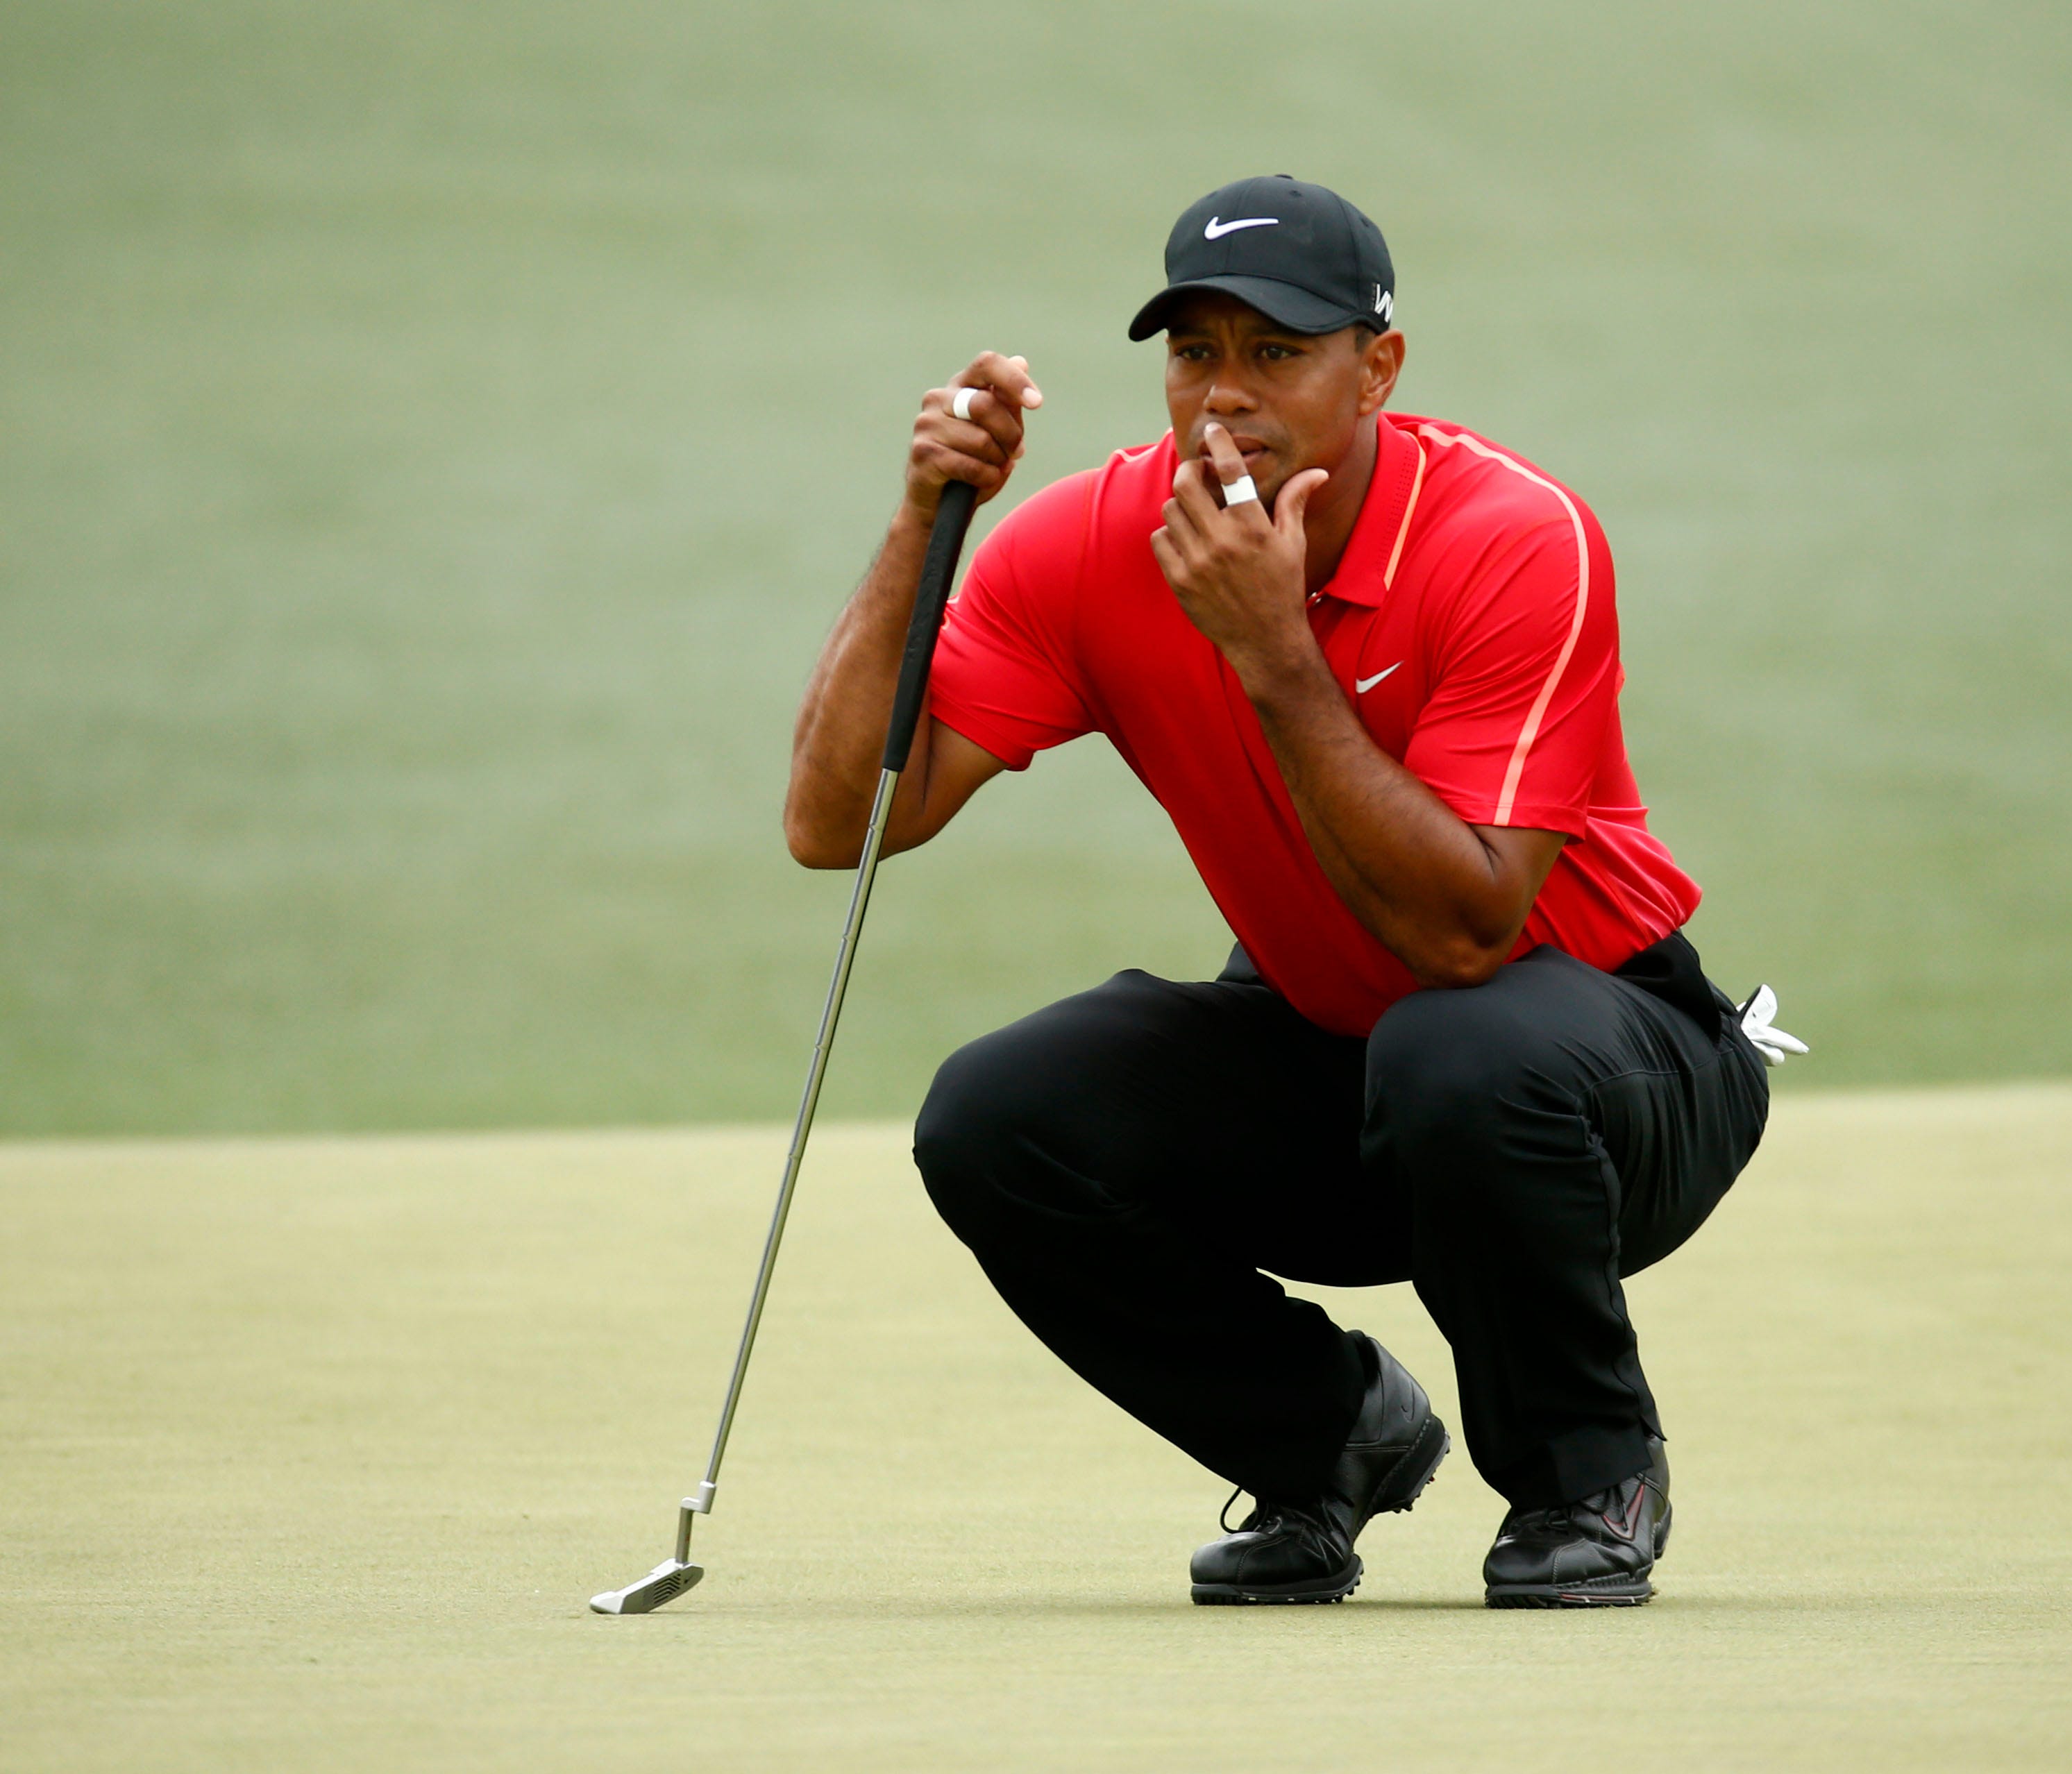 Apr 12, 2015; Augusta, GA, USA; Tiger Woods on the 2nd green during the final round of The Masters golf tournament at Augusta National Golf Club. Mandatory Credit: Rob Schumacher-USA TODAY Sports ORG XMIT: USATSI-189696 ORIG FILE ID:  20150412_jla_us